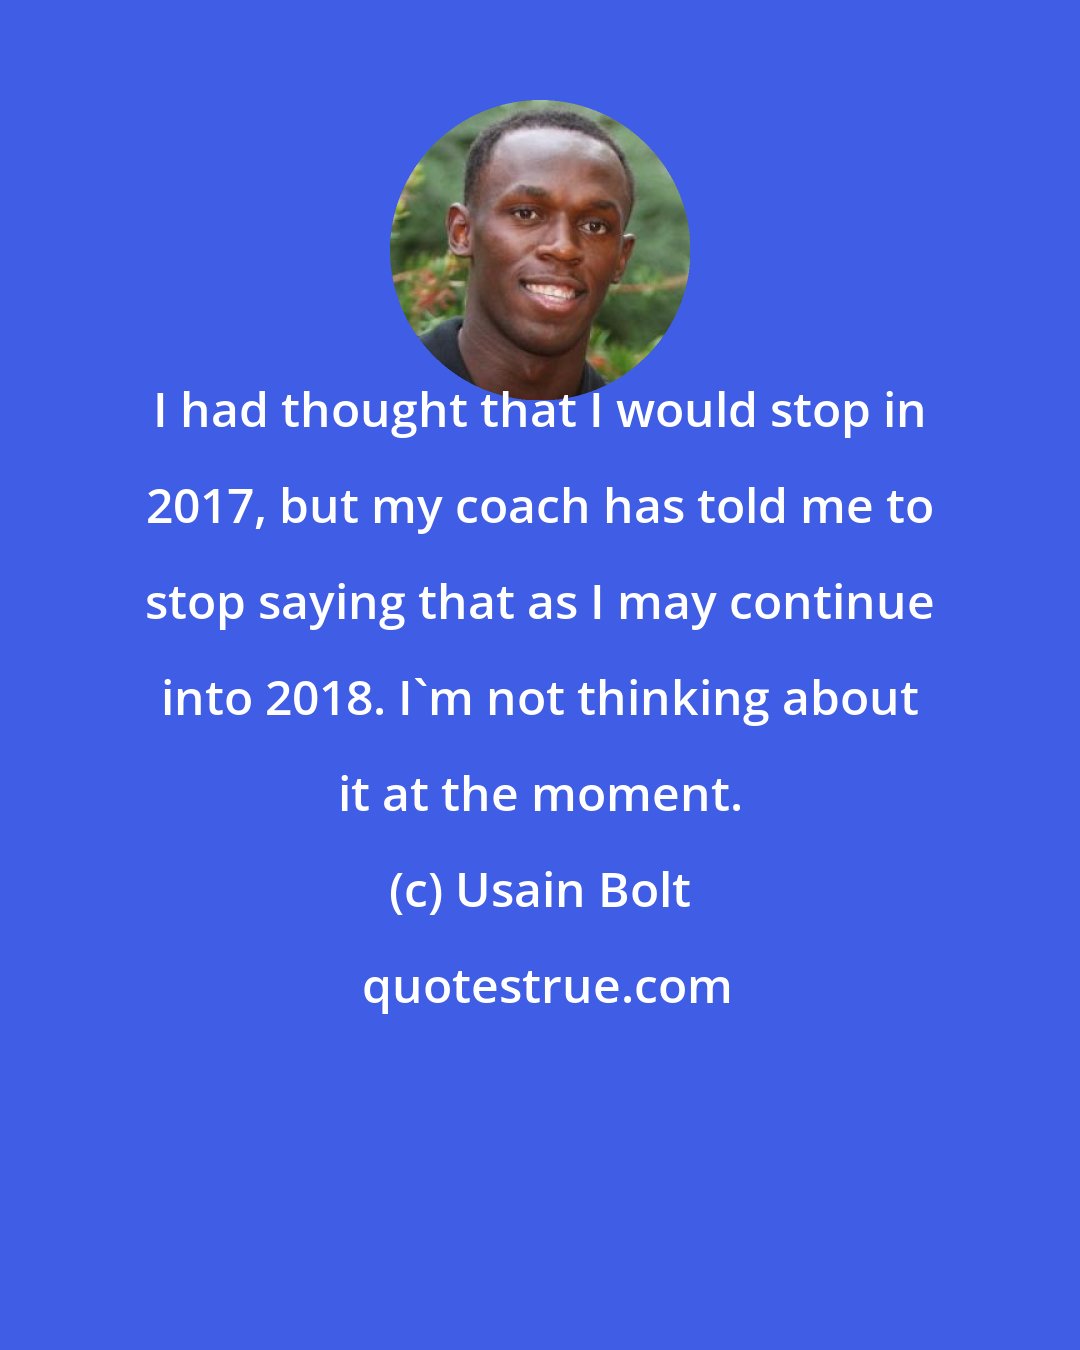 Usain Bolt: I had thought that I would stop in 2017, but my coach has told me to stop saying that as I may continue into 2018. I'm not thinking about it at the moment.